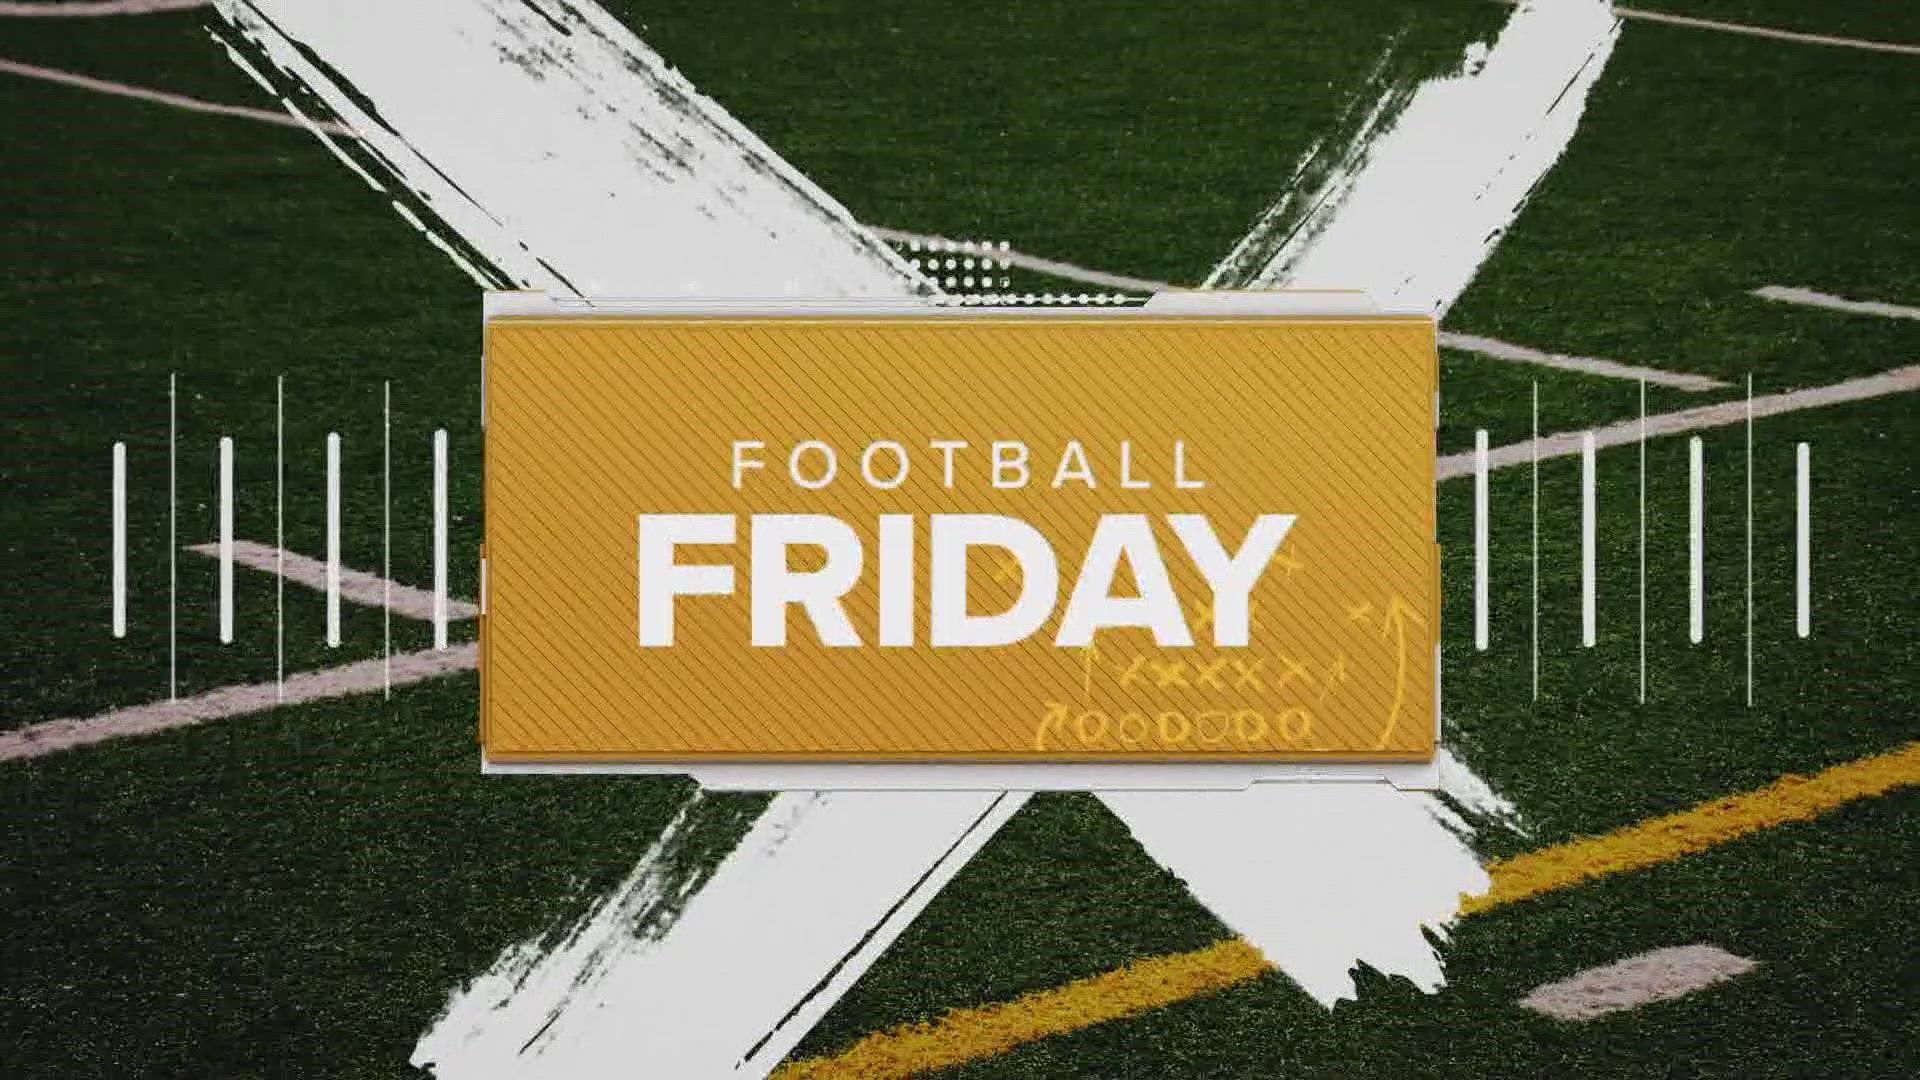 High school football is back in Eastern Washington and North Idaho! Don't miss any of the action from Week 3 of KREM 2 Football Friday.